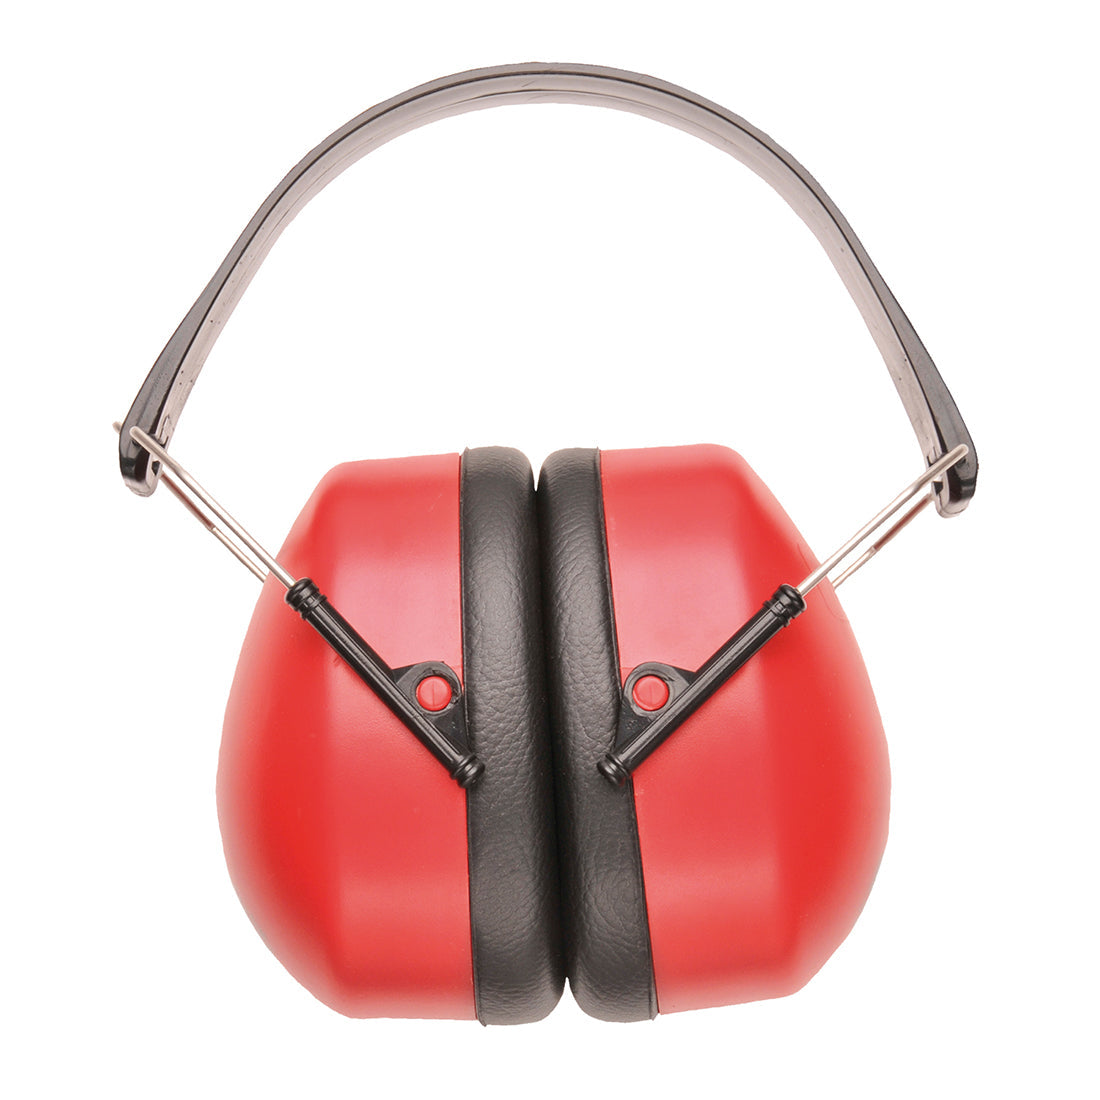 Portwest Super Ear Protectors PW41 - New England Safety Supply